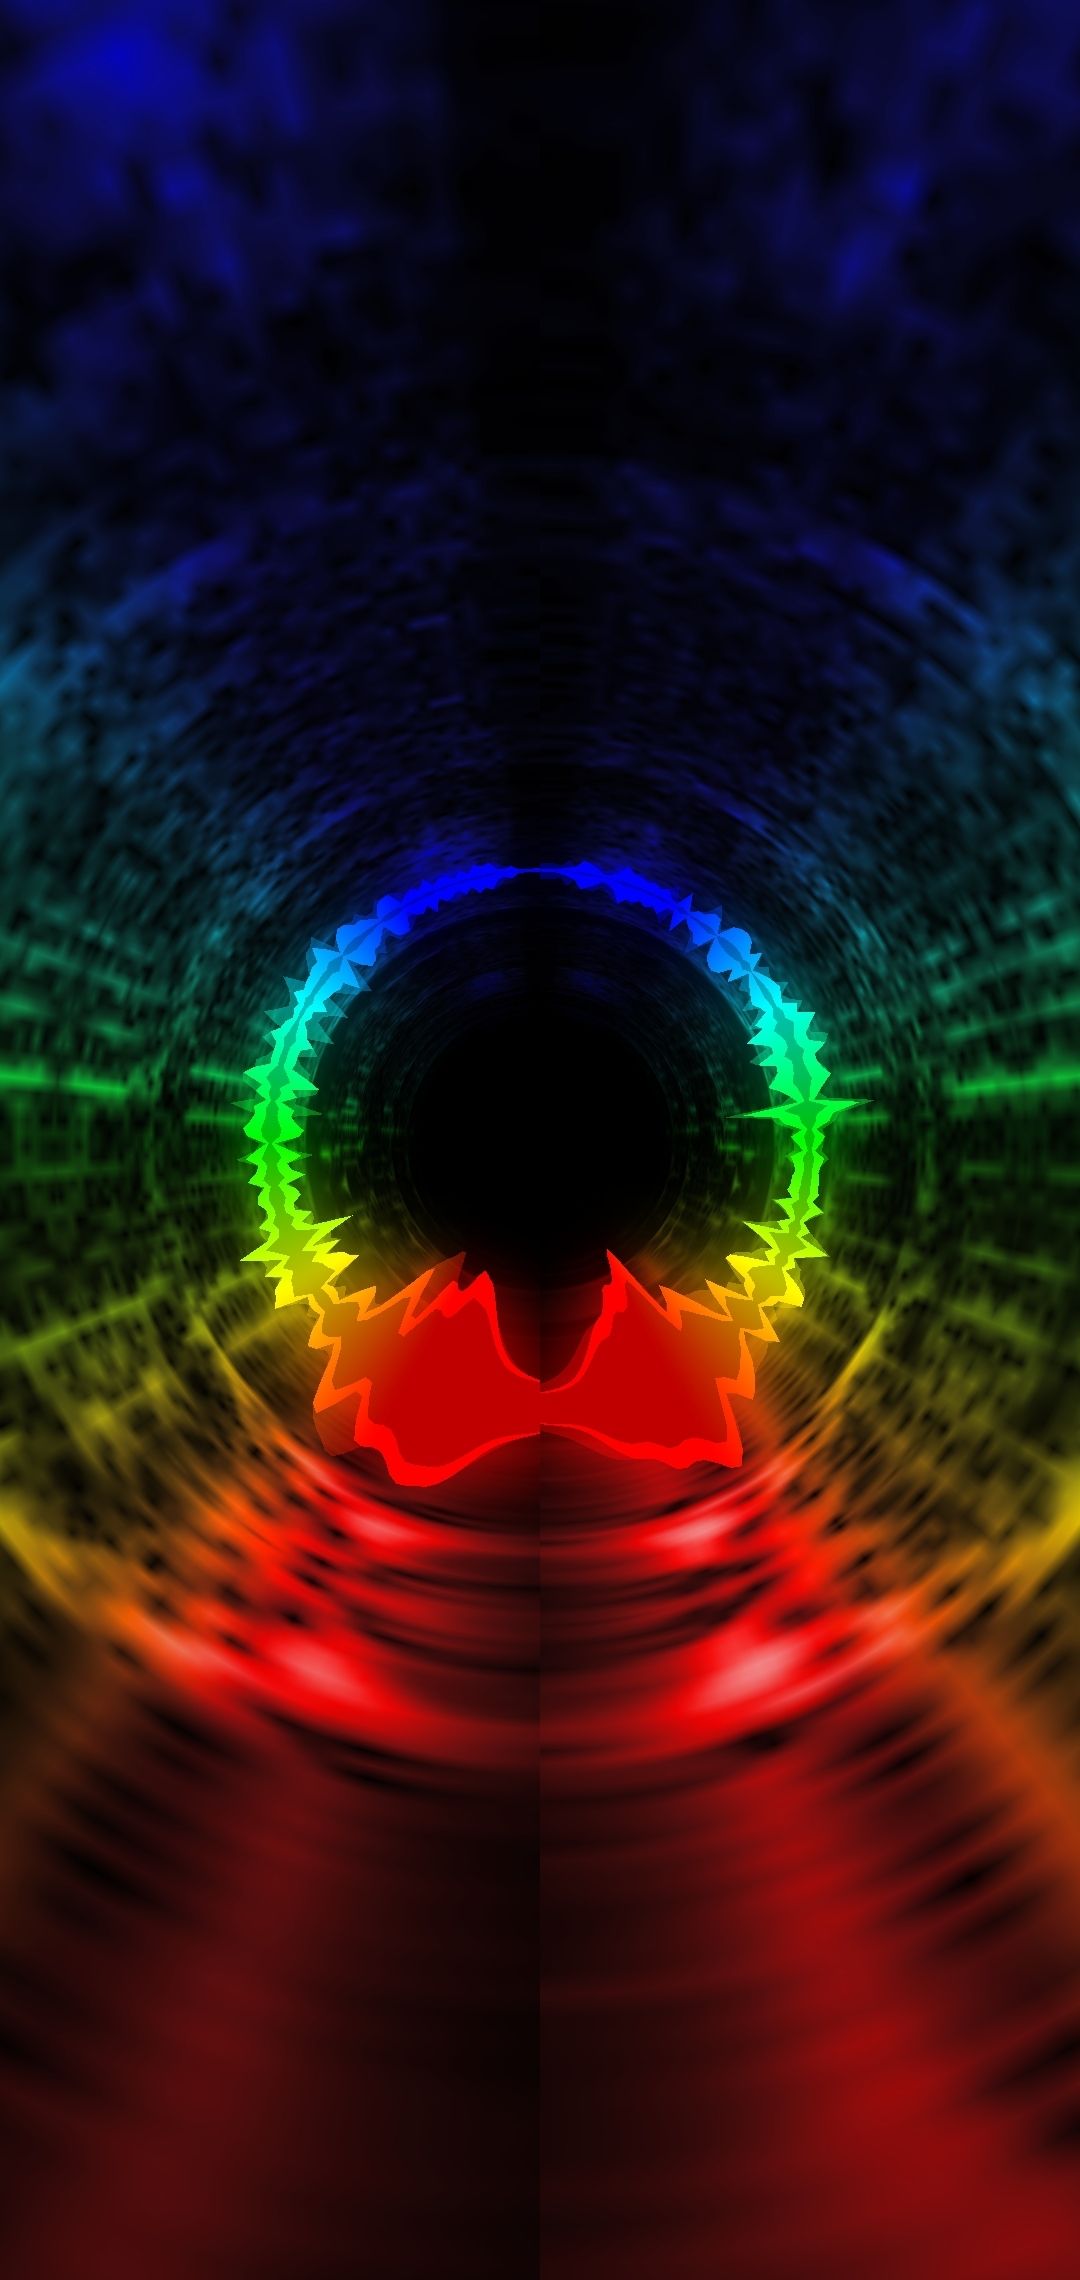 Spectrolizer displaying a rainbow visualizer in the circle pattern